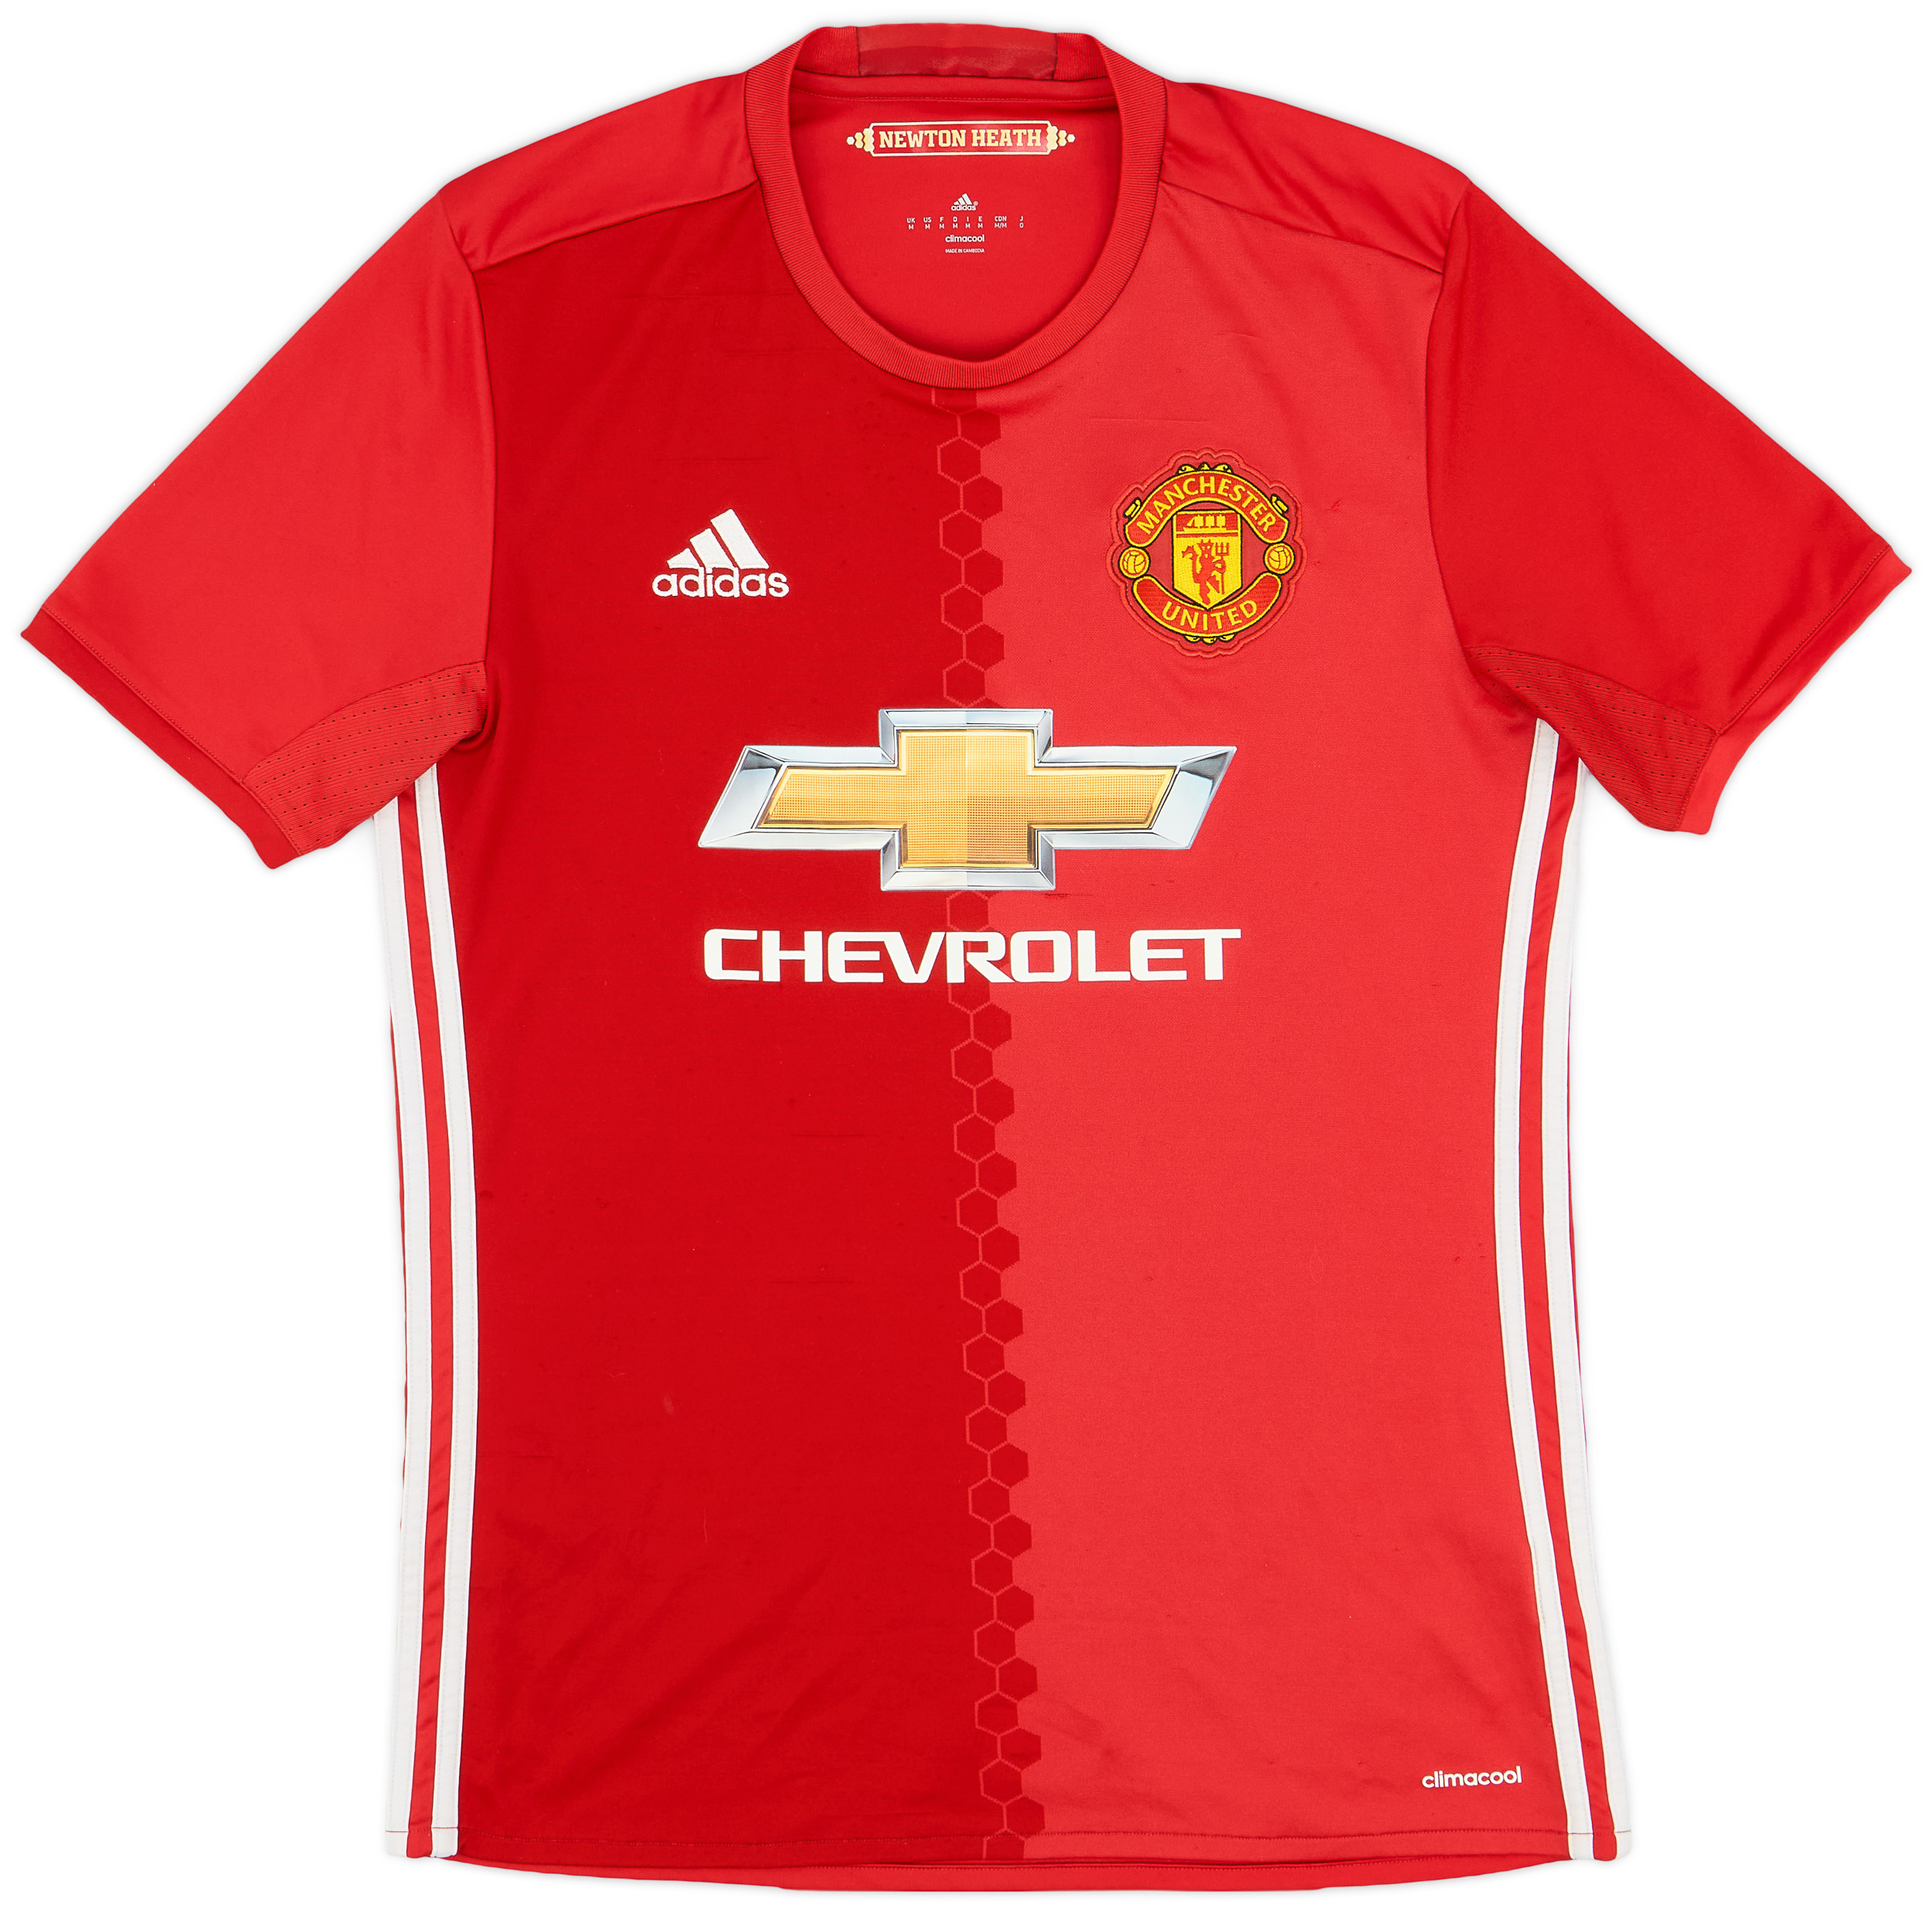 2016-17 Manchester United Home Shirt - 7/10 - ()